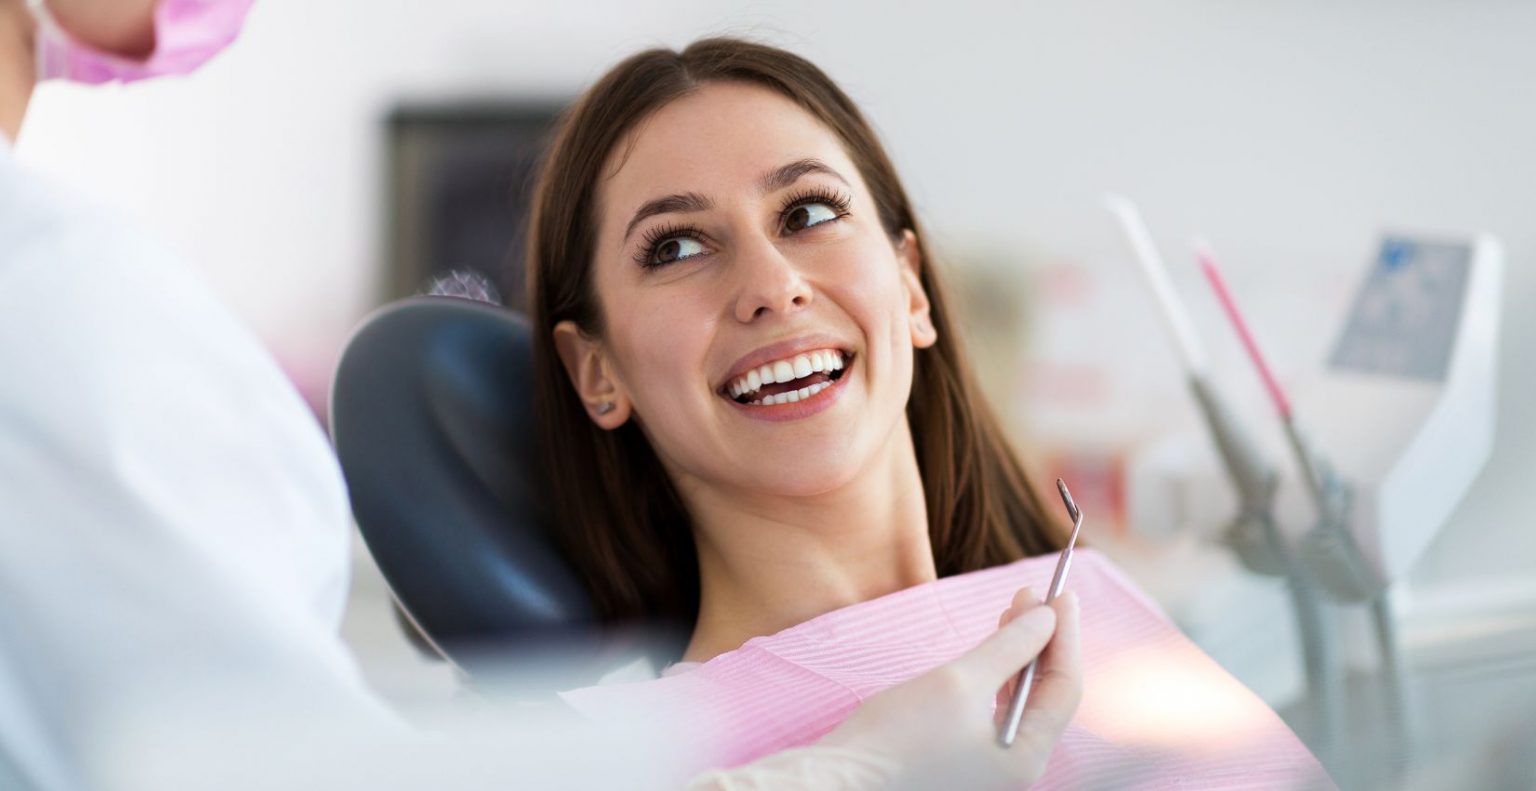 how much is a visit to the dentist without insurance